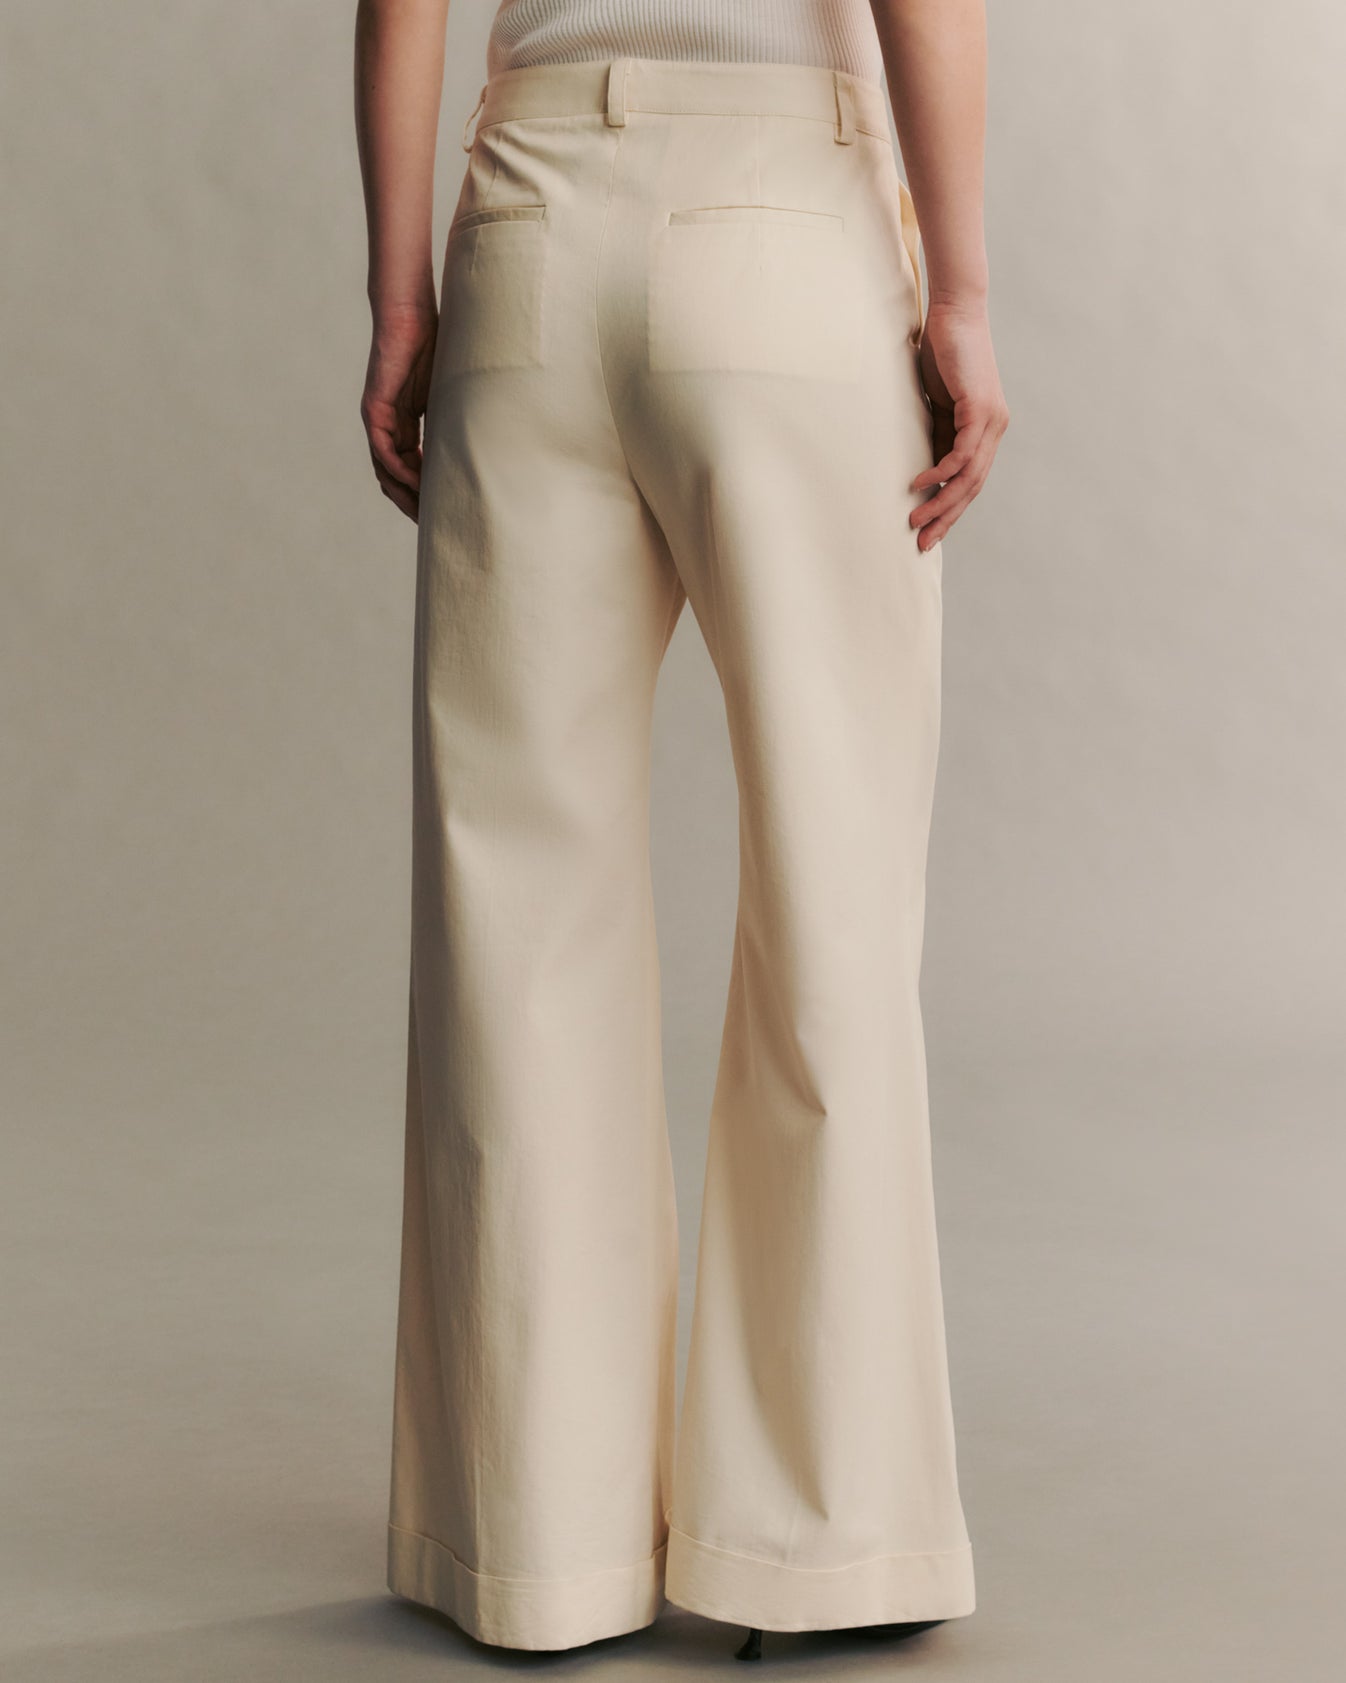 TWP Winter white Howard Pant with Cuffs in cotton gabardine view 4